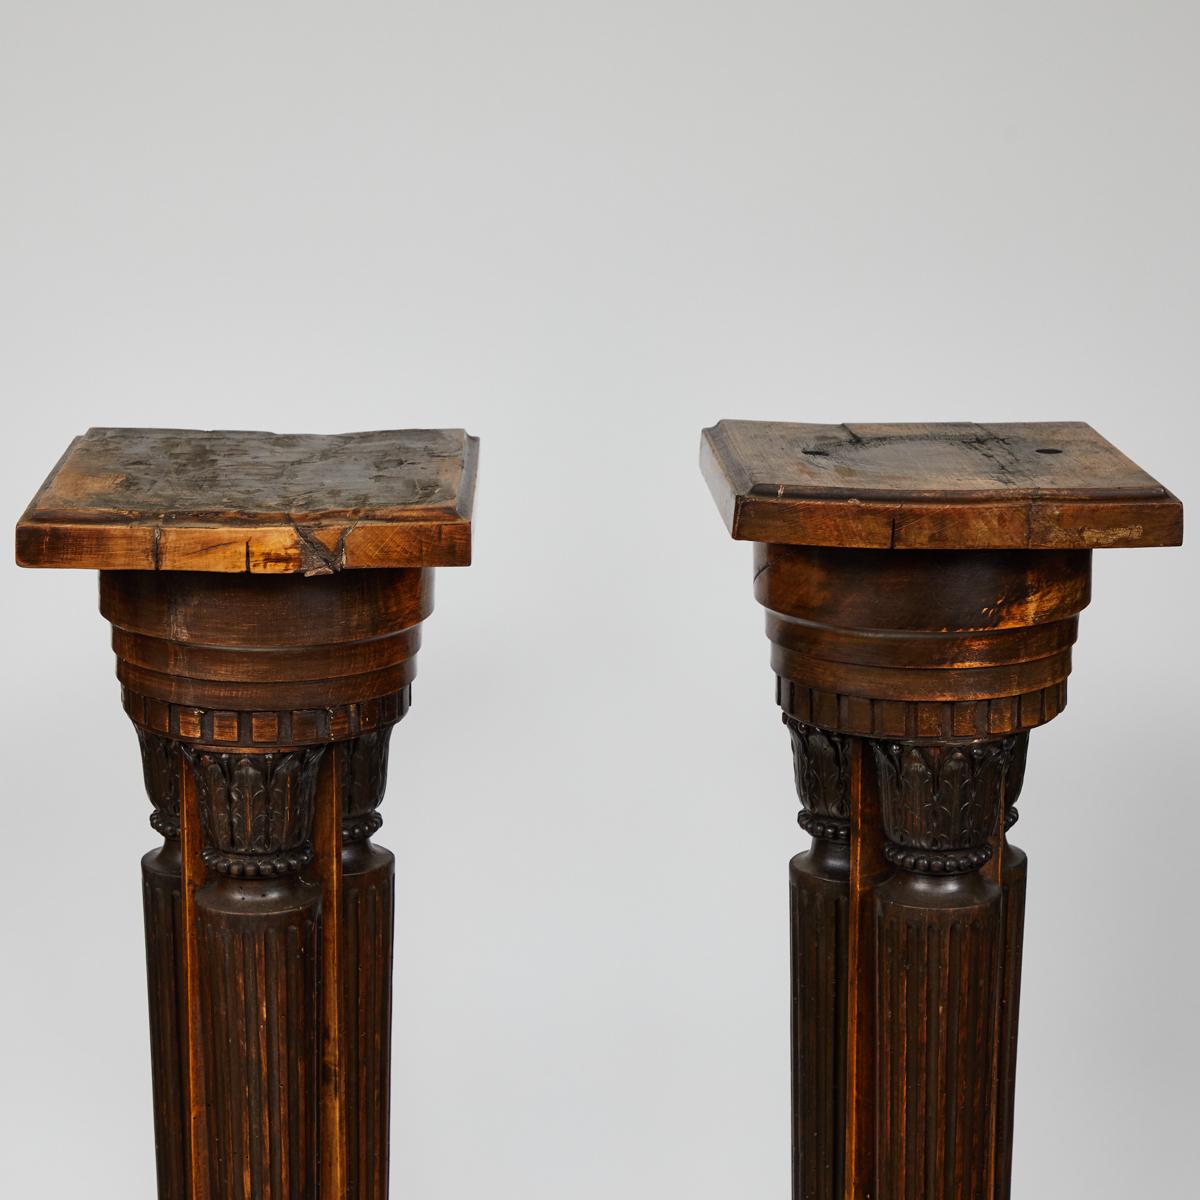 Late 19th century French pair of classical pedestal stand plinths. They feature carved corinthian columns.